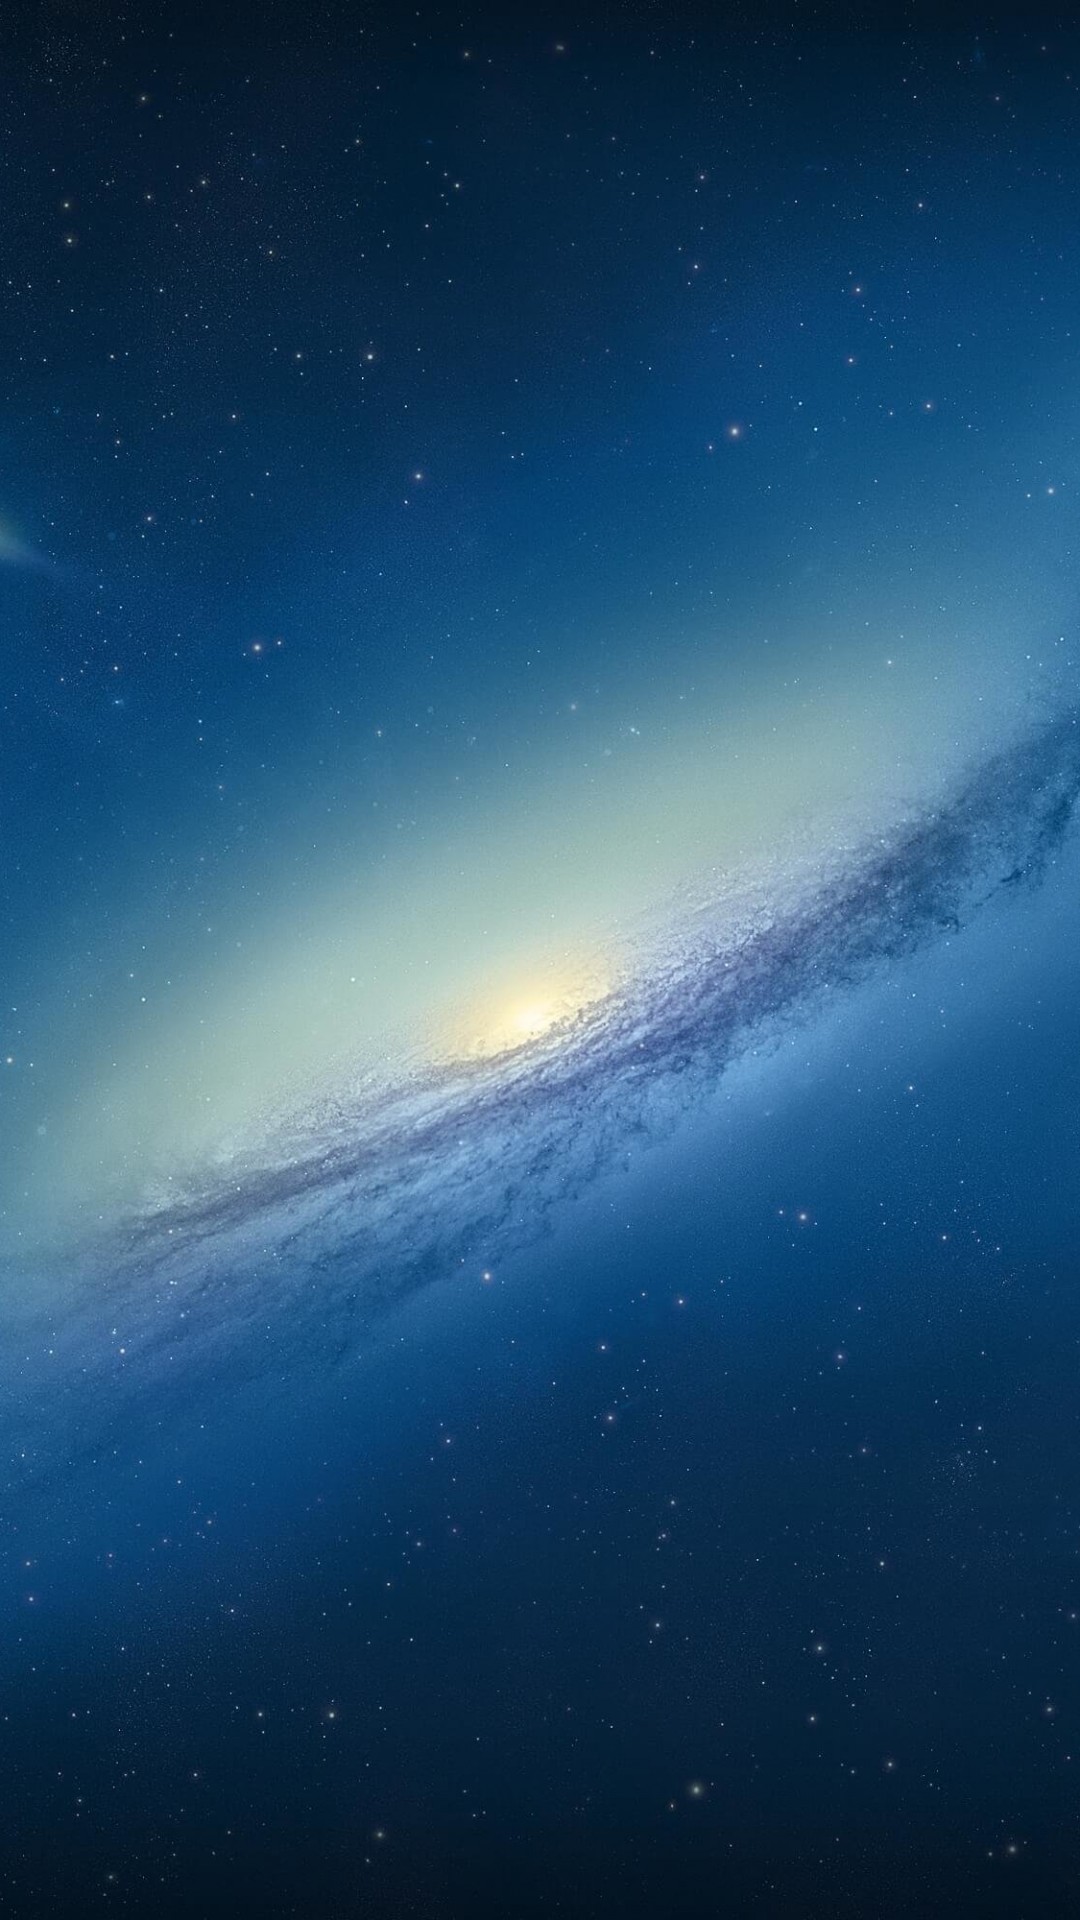 Galaxy NGC 3190 Wallpaper for SONY Xperia Z2